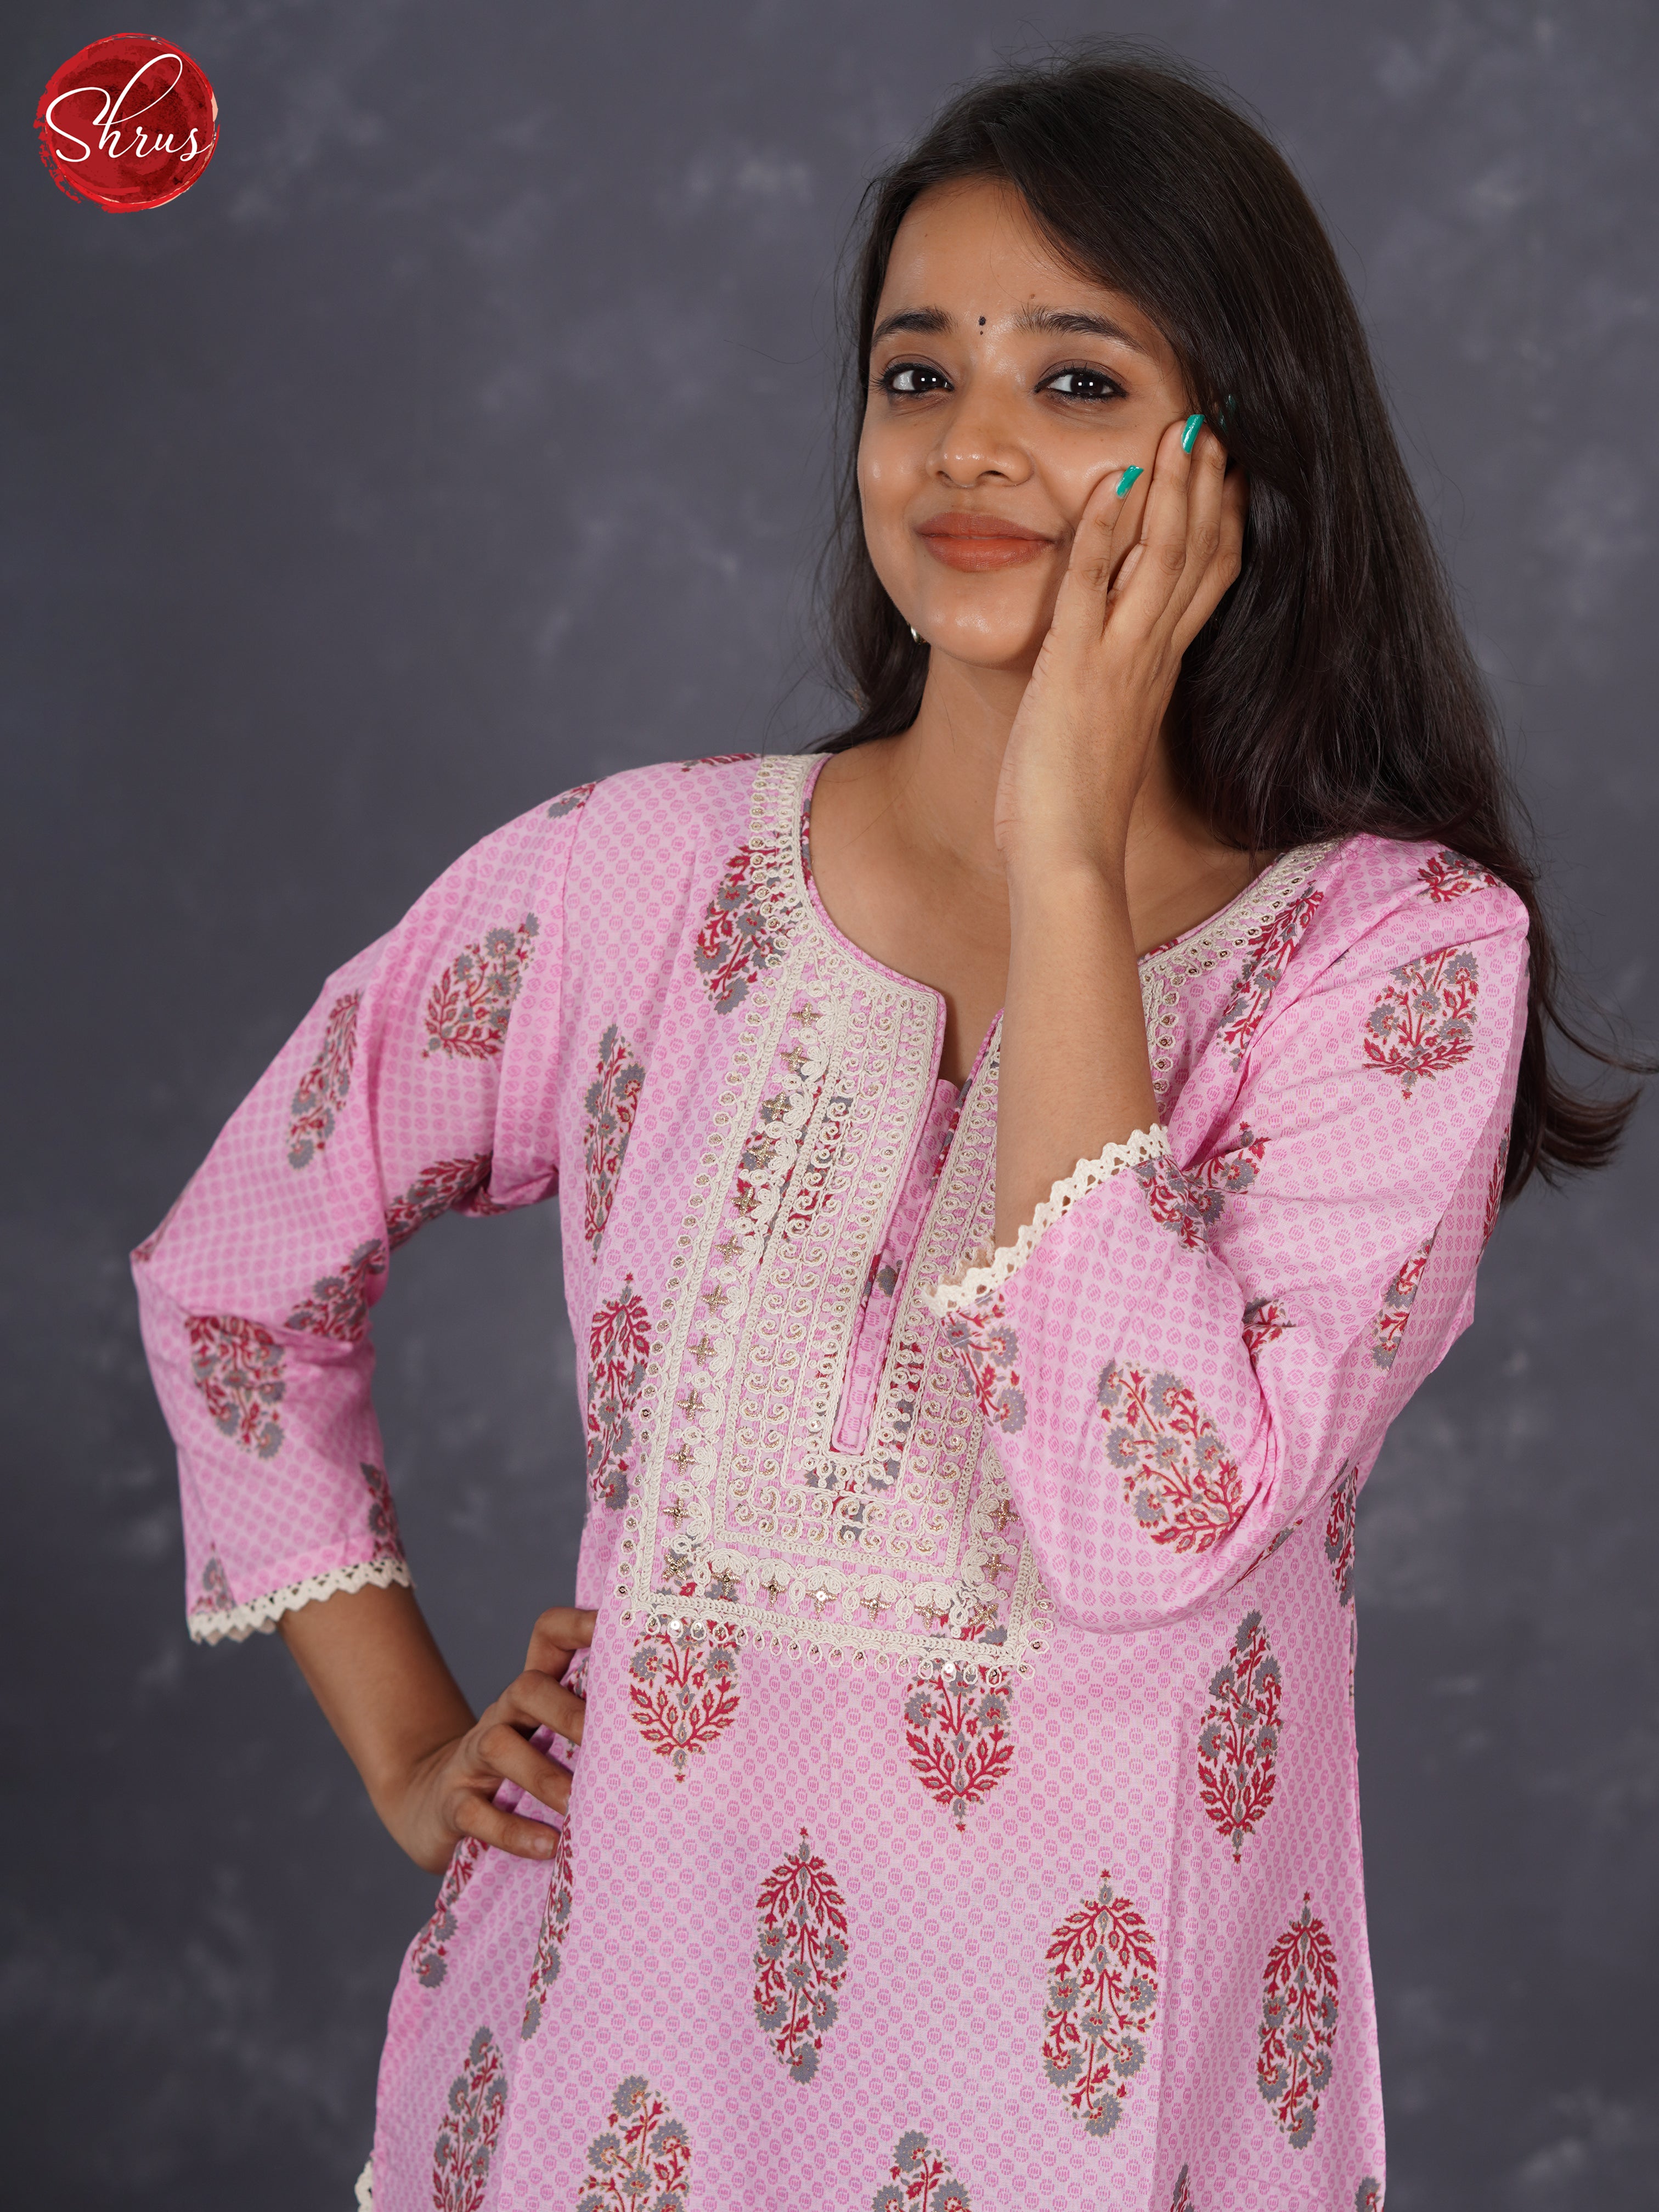 Pink - Readymade kurti top with floral print & Lace embroidery - Shop on ShrusEternity.com